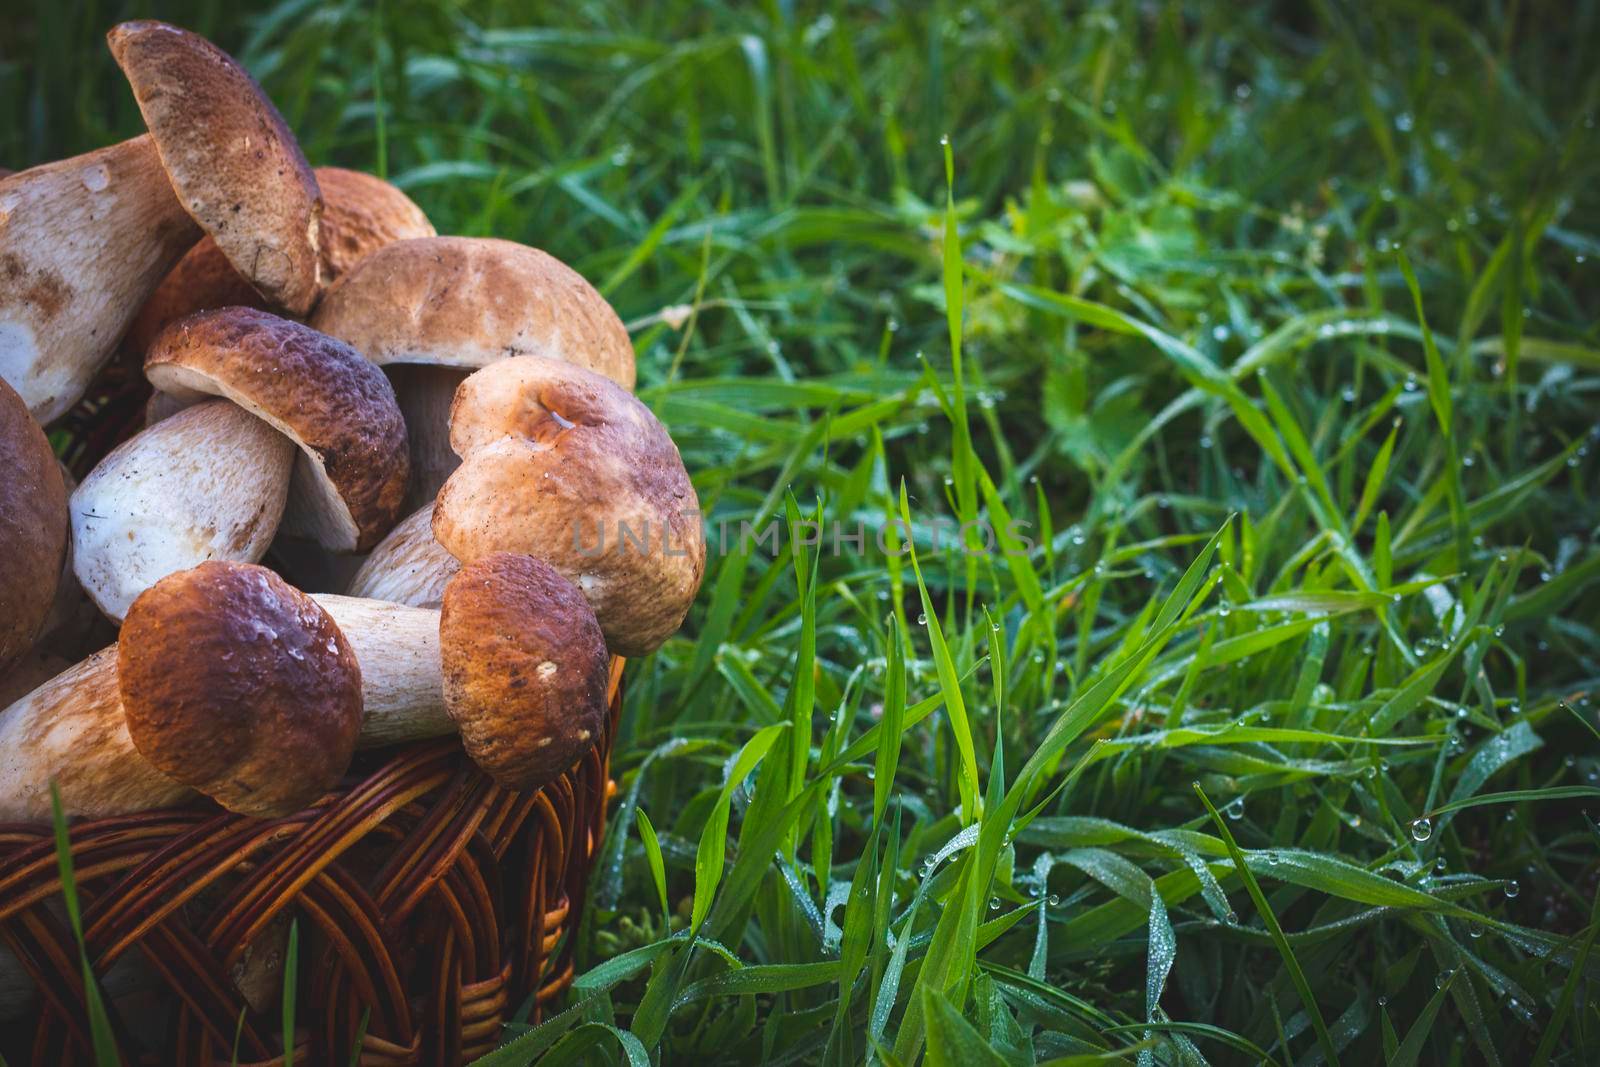 Cep mushrooms in basket and wet grass Pick up boletus cep mushroom in wild wood. Forest natural food